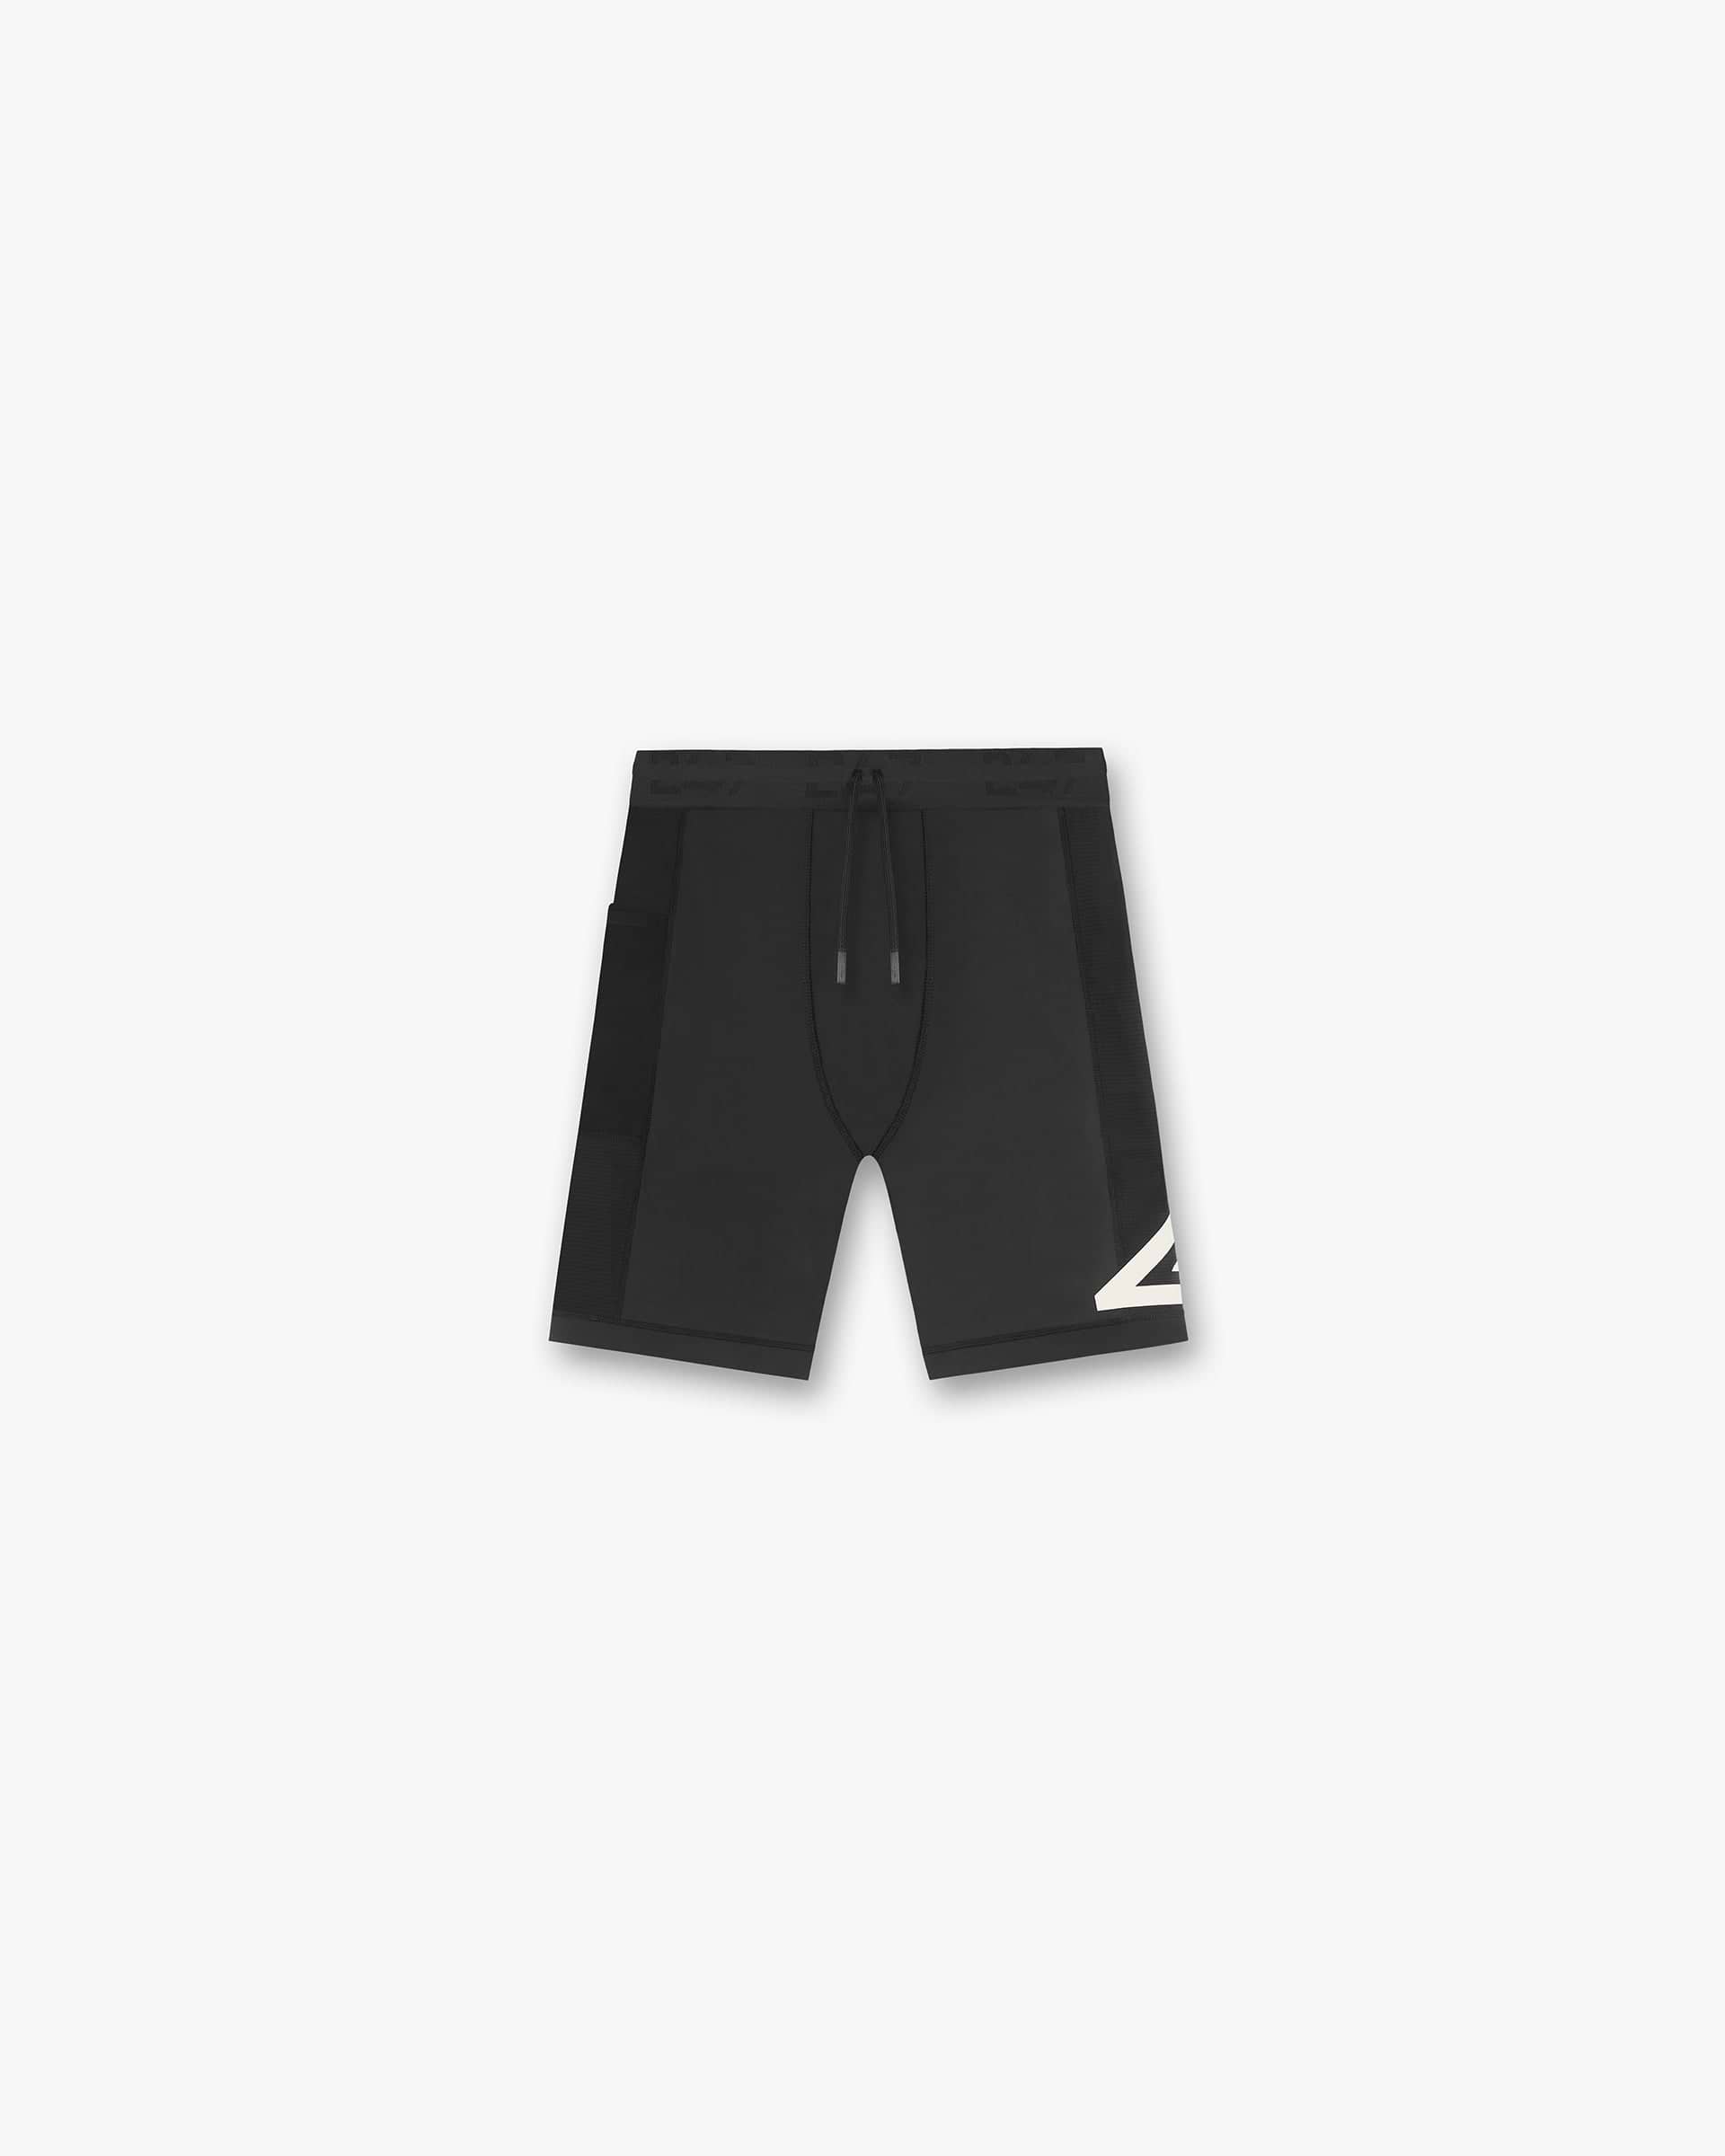 WORKOUT SHORTS COLLECTION –